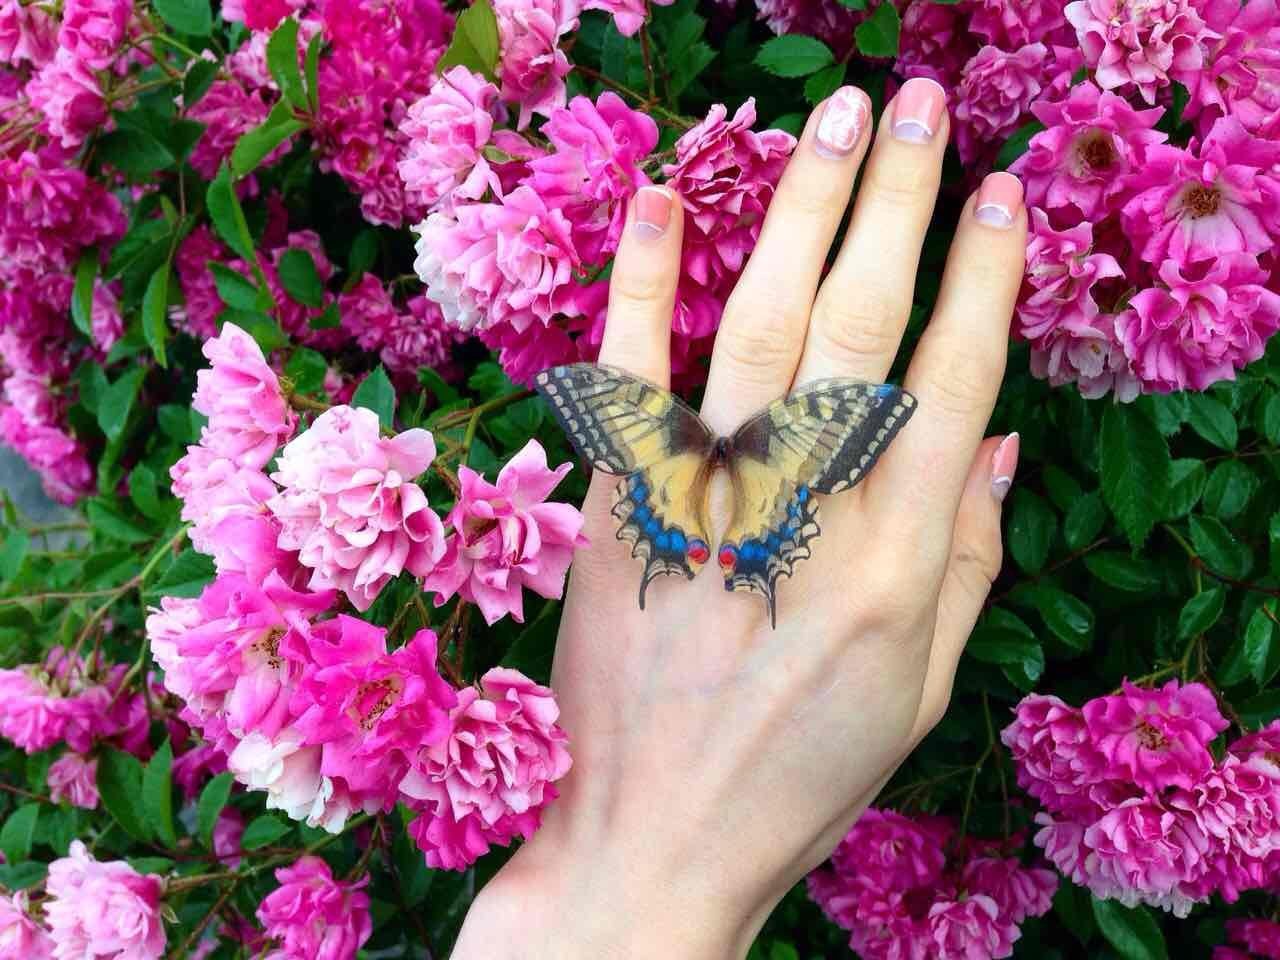 Nature-inspired jewelry perfect for any occasion